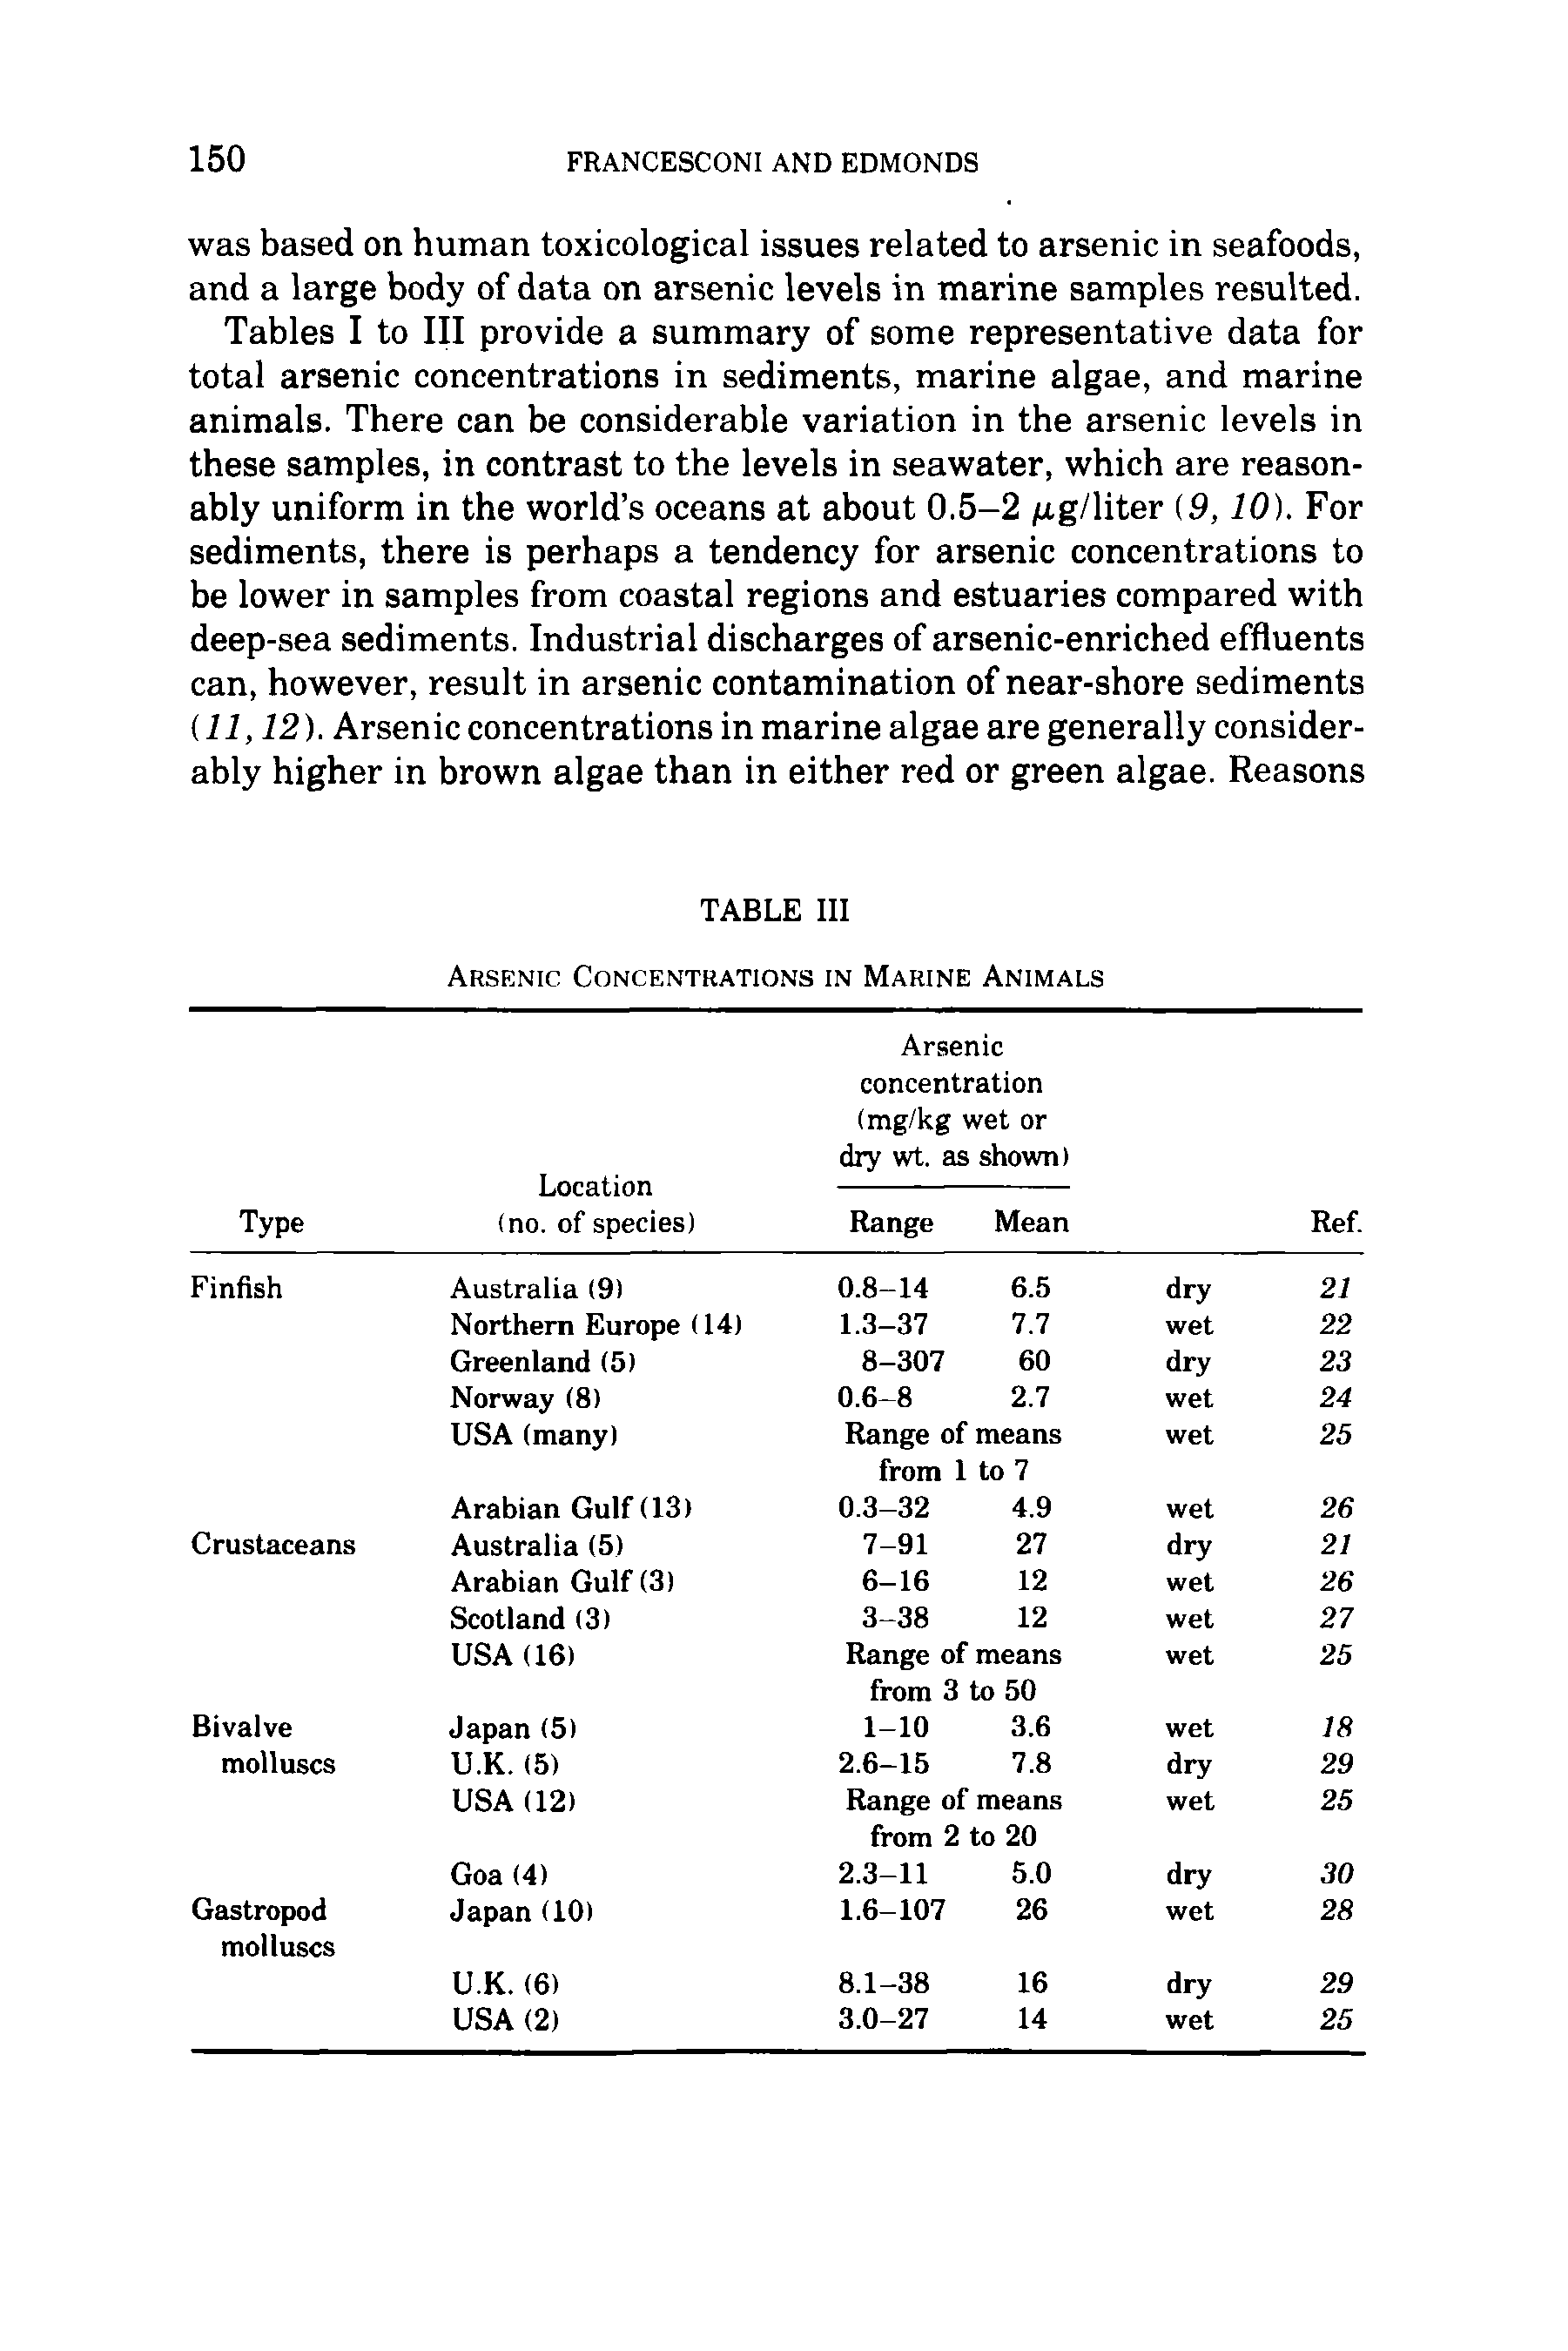 Tables I to III provide a summary of some representative data for total arsenic concentrations in sediments, marine algae, and marine animals. There can be considerable variation in the arsenic levels in these samples, in contrast to the levels in seawater, which are reasonably uniform in the world s oceans at about 0.5-2 /ug/liter (9,10). For sediments, there is perhaps a tendency for arsenic concentrations to be lower in samples from coastal regions and estuaries compared with deep-sea sediments. Industrial discharges of arsenic-enriched effluents can, however, result in arsenic contamination of near-shore sediments...